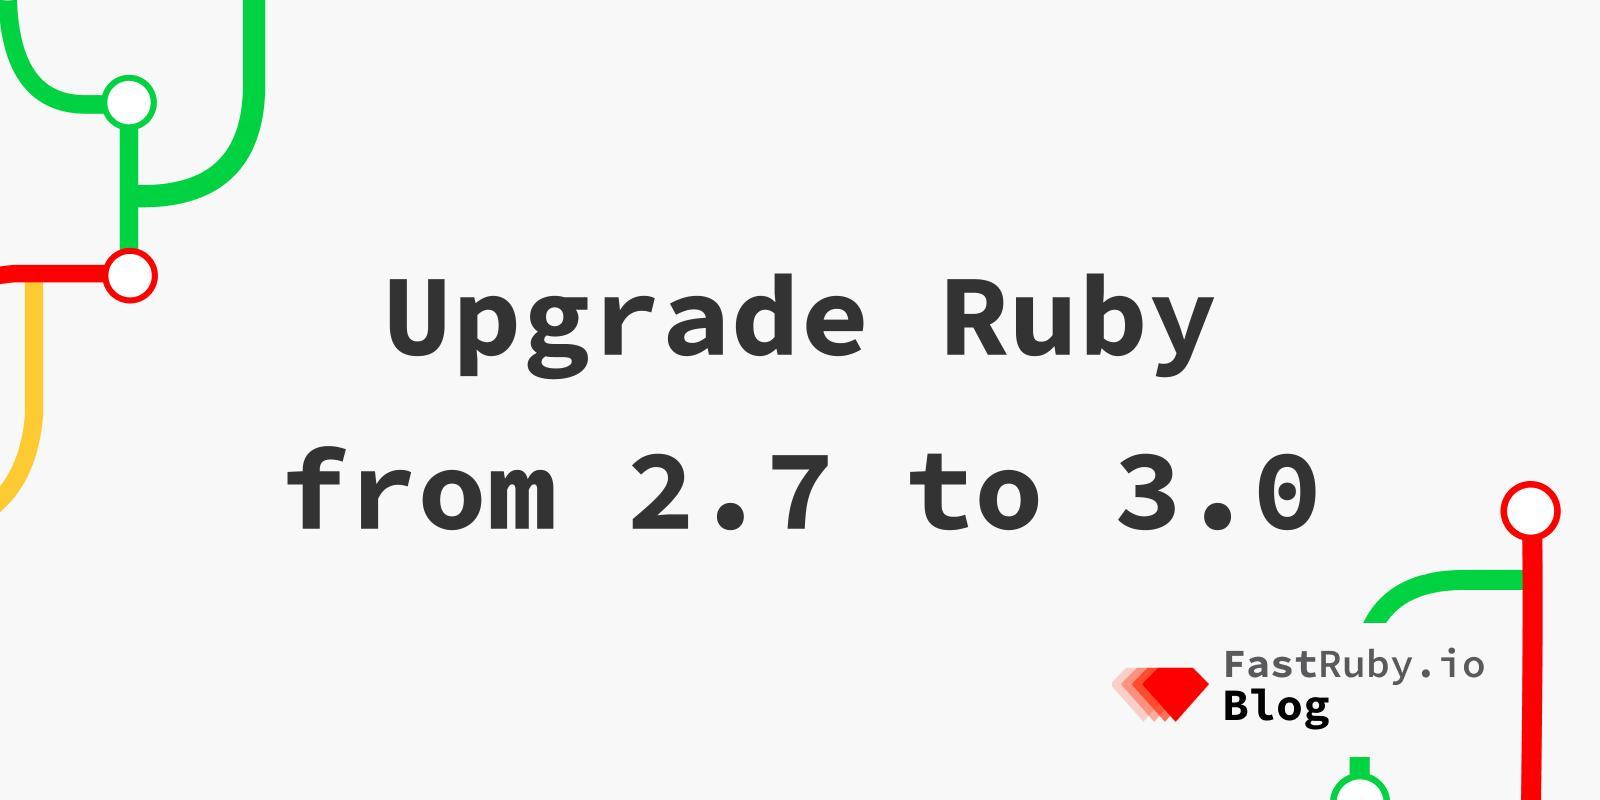 Upgrade Ruby from 2.7 to 3.0